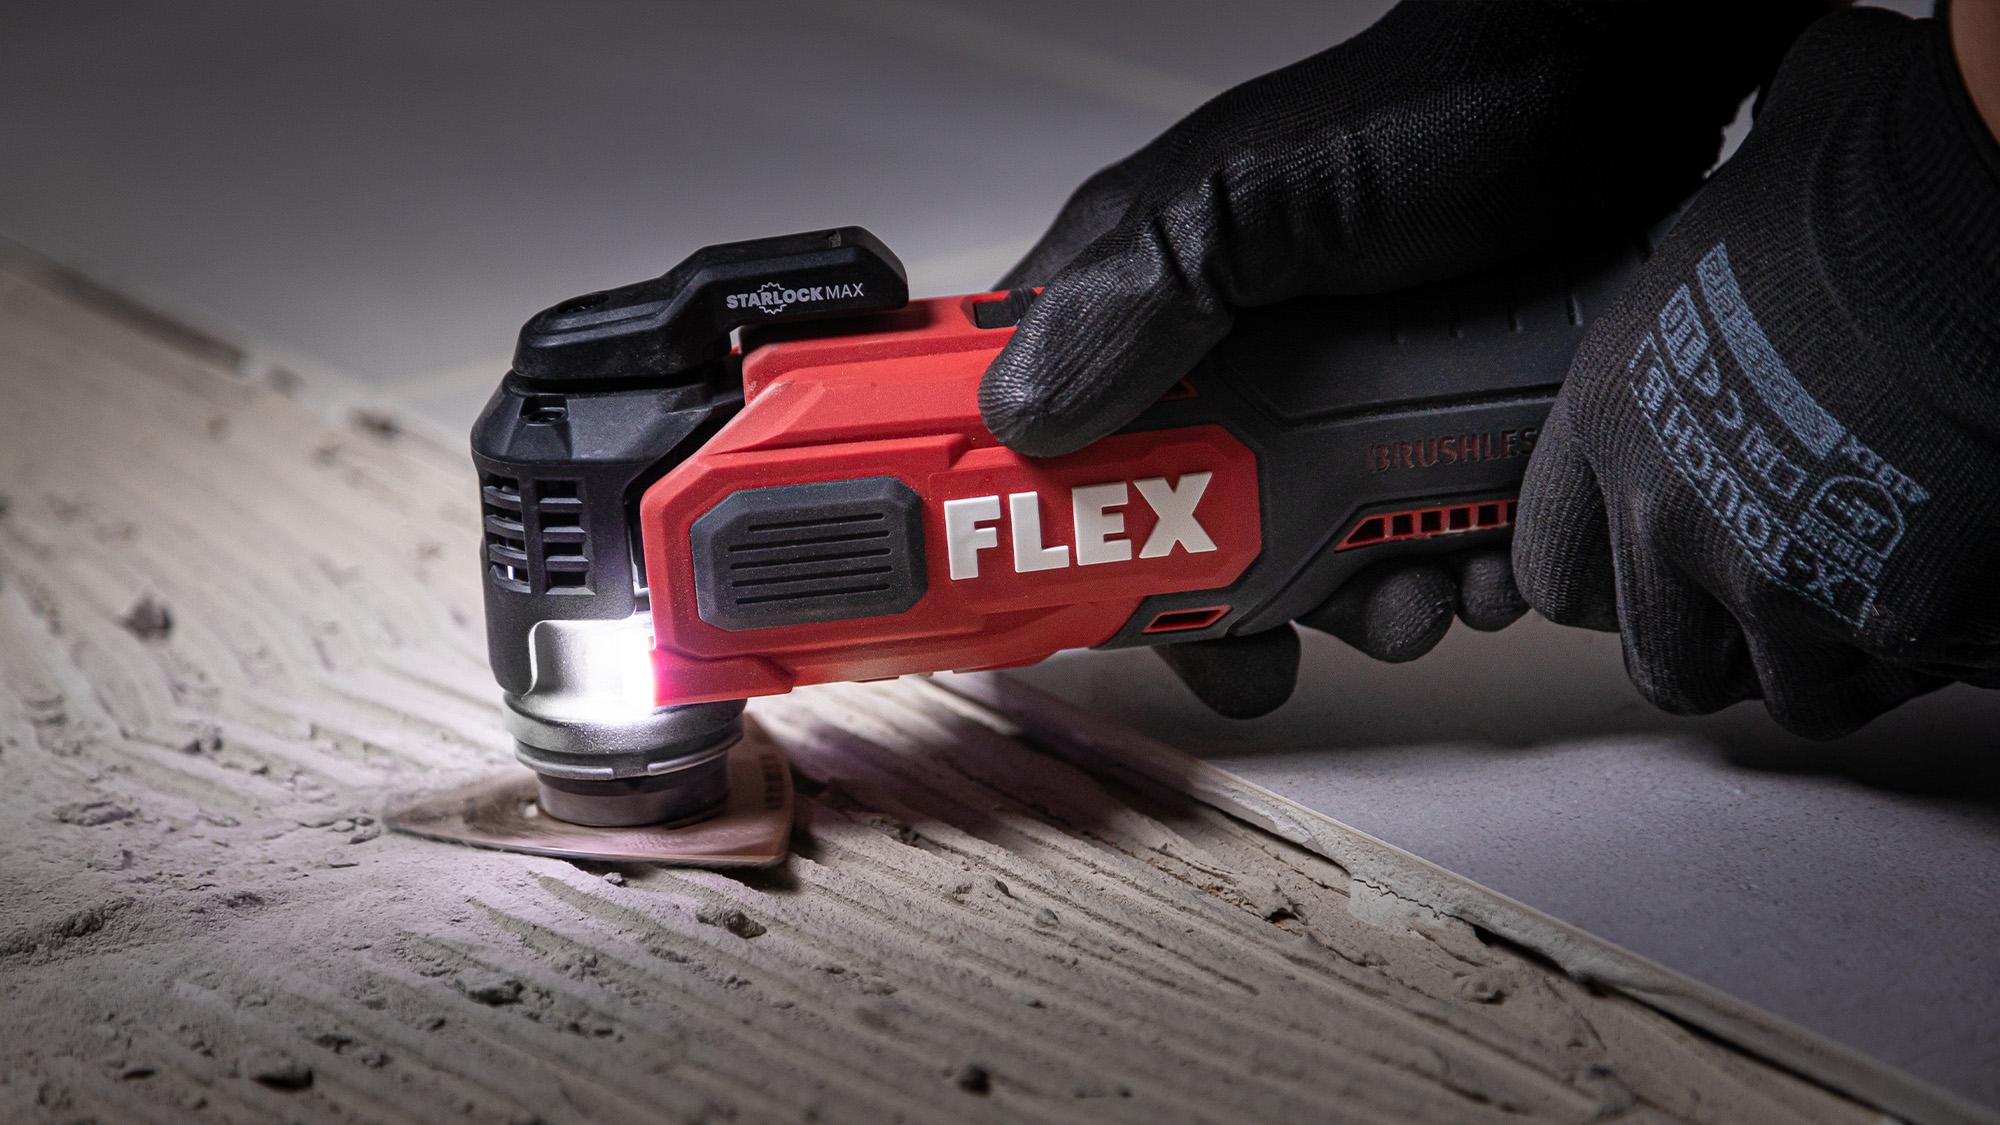 Scrape off tile adhesive with the FLEX Multitool